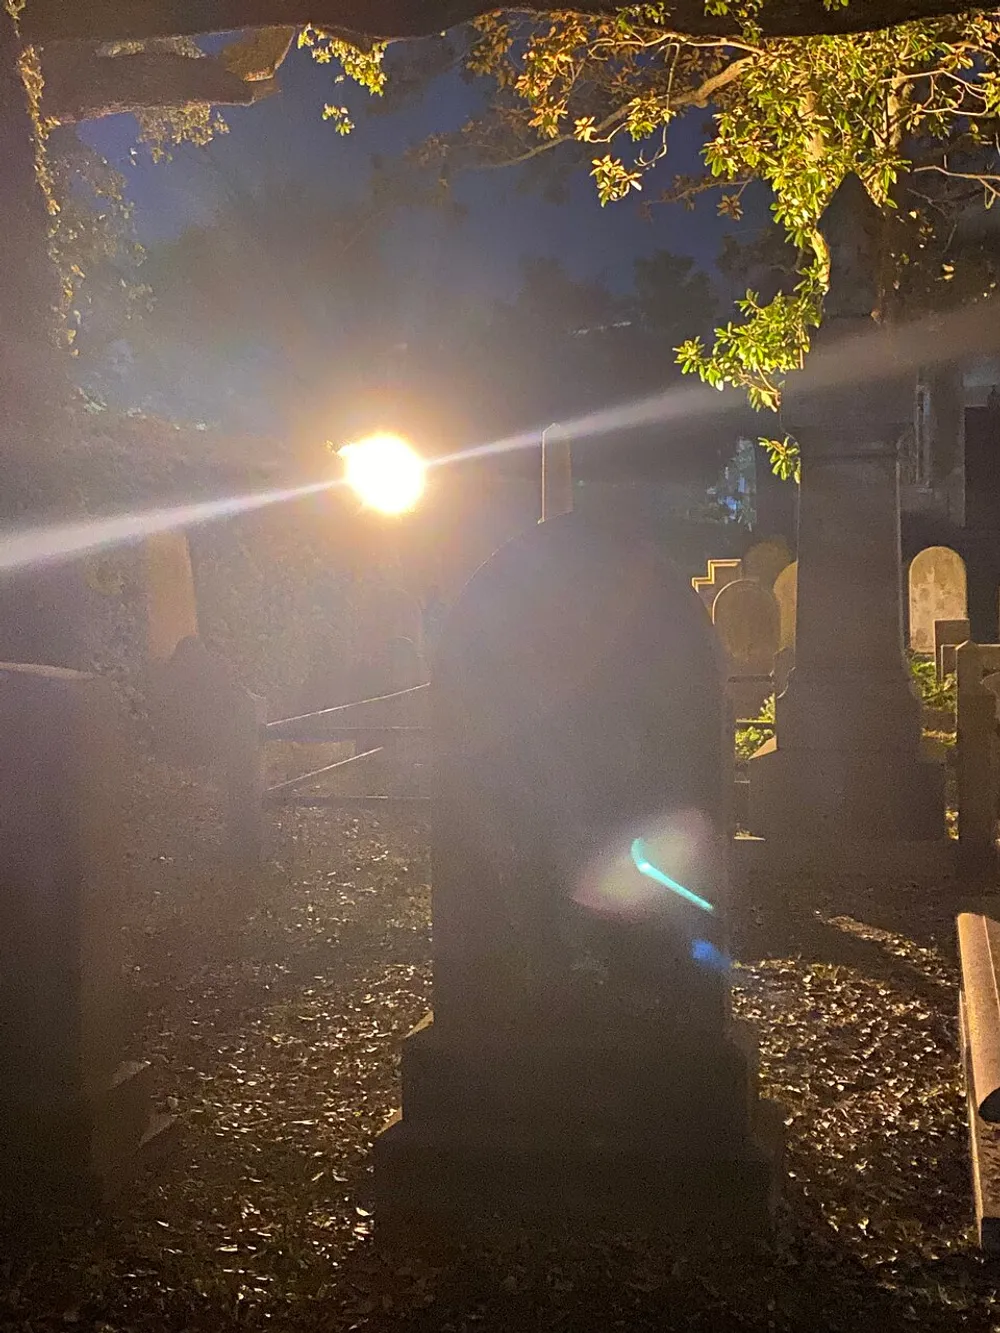 The image features a nighttime view of a cemetery with tombstones illuminated by a bright light behind one of the monuments creating a haunting ambiance with lens flare effects